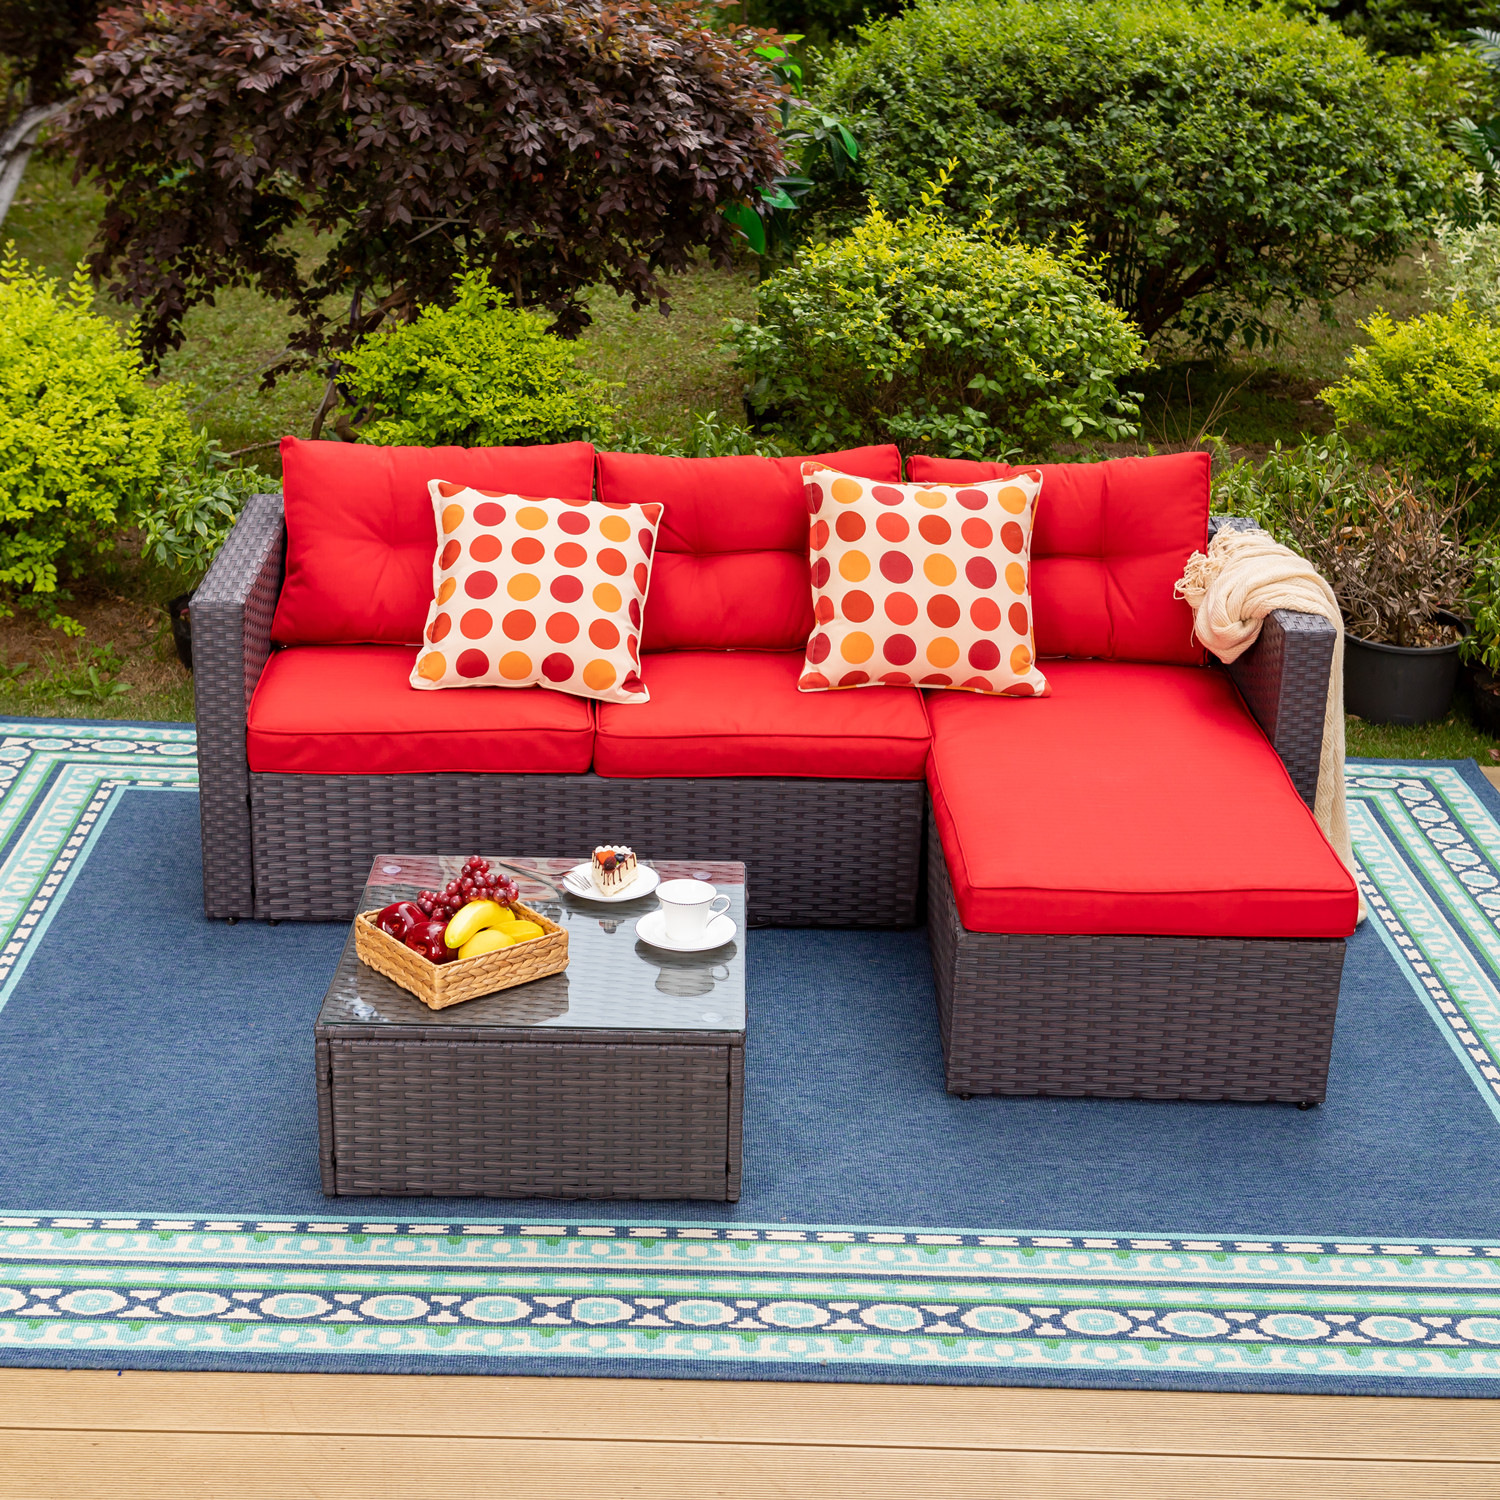 MF Studio 3 Pieces Outdoor Sectional Sofa Set Wicker Patio Furniture Conversation Set with Red Cushions - image 1 of 11